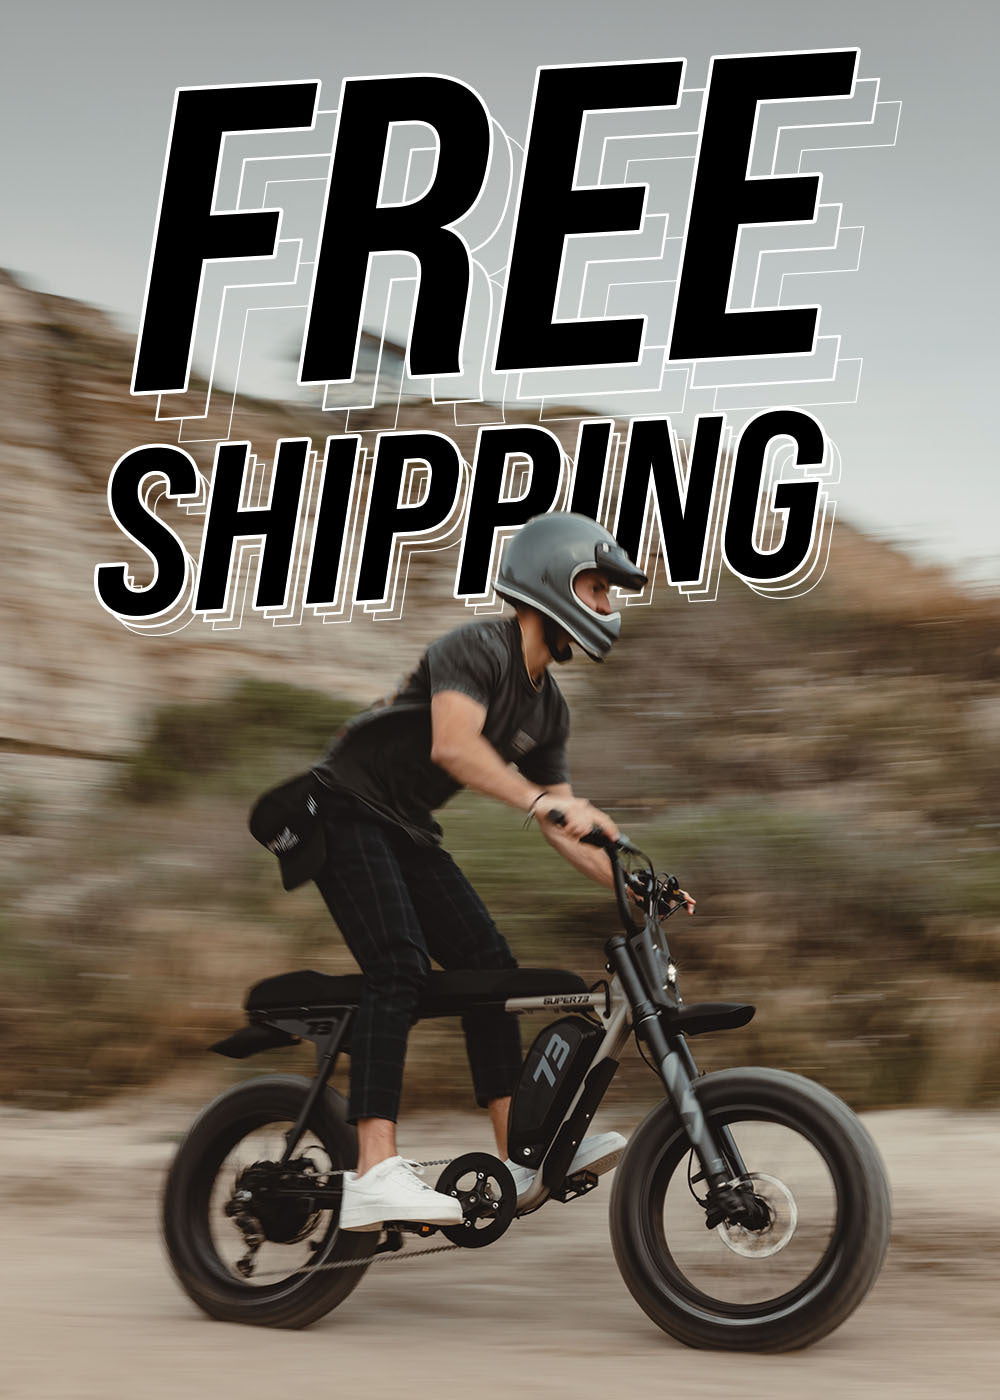 Free shipping promotion graphic